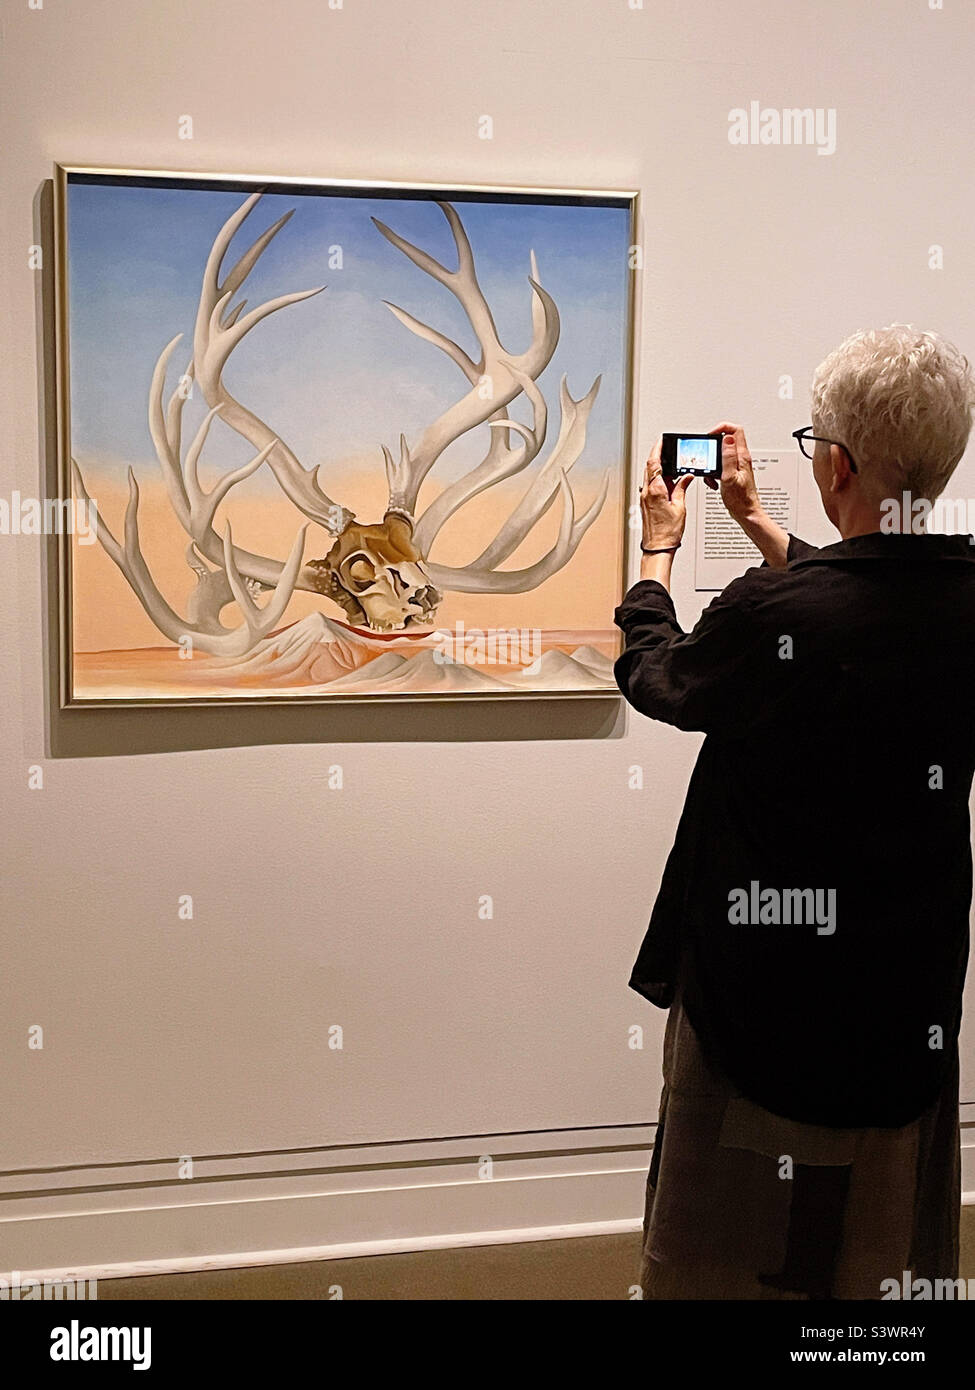 Metropolitan museum of art is home to a famous Georgia O’Keeffe painting, from the far away nearby and a senior woman is taking a photo of it, 2022, USA, New York City Stock Photo